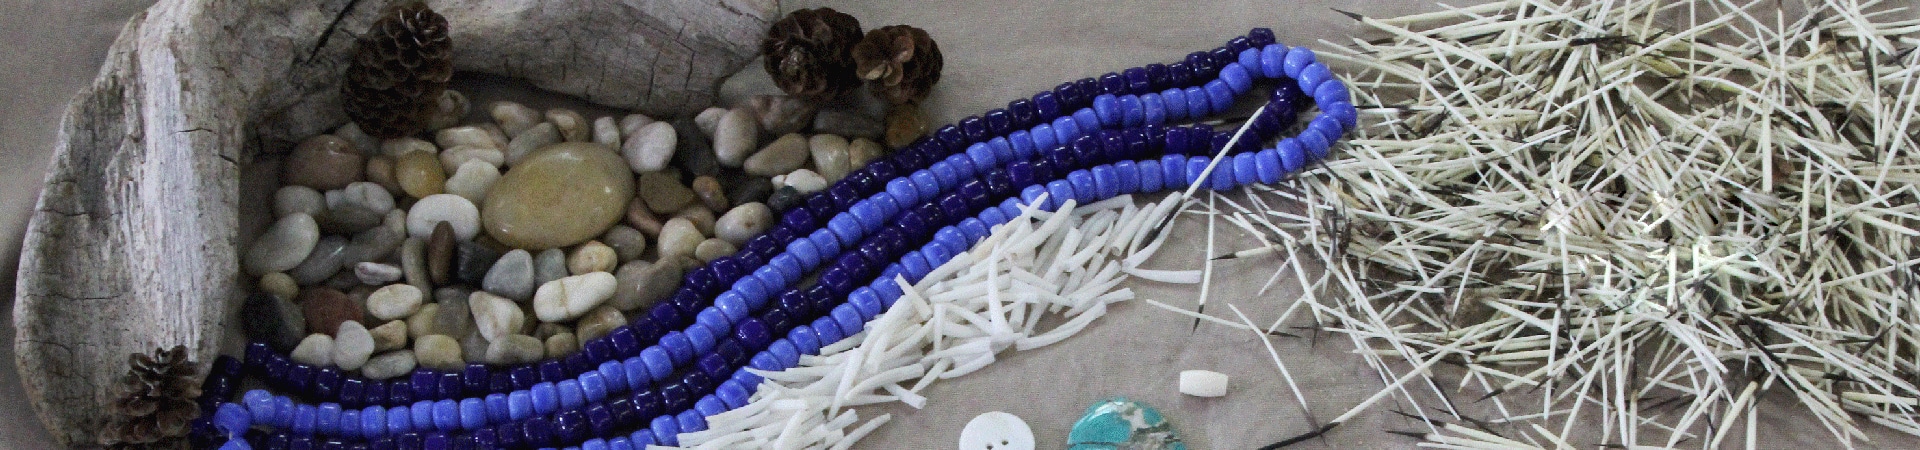 Dentalium Shells, Porcupine Quills Hairpipes, Crow Beads, & More available at Alaska Bead Company